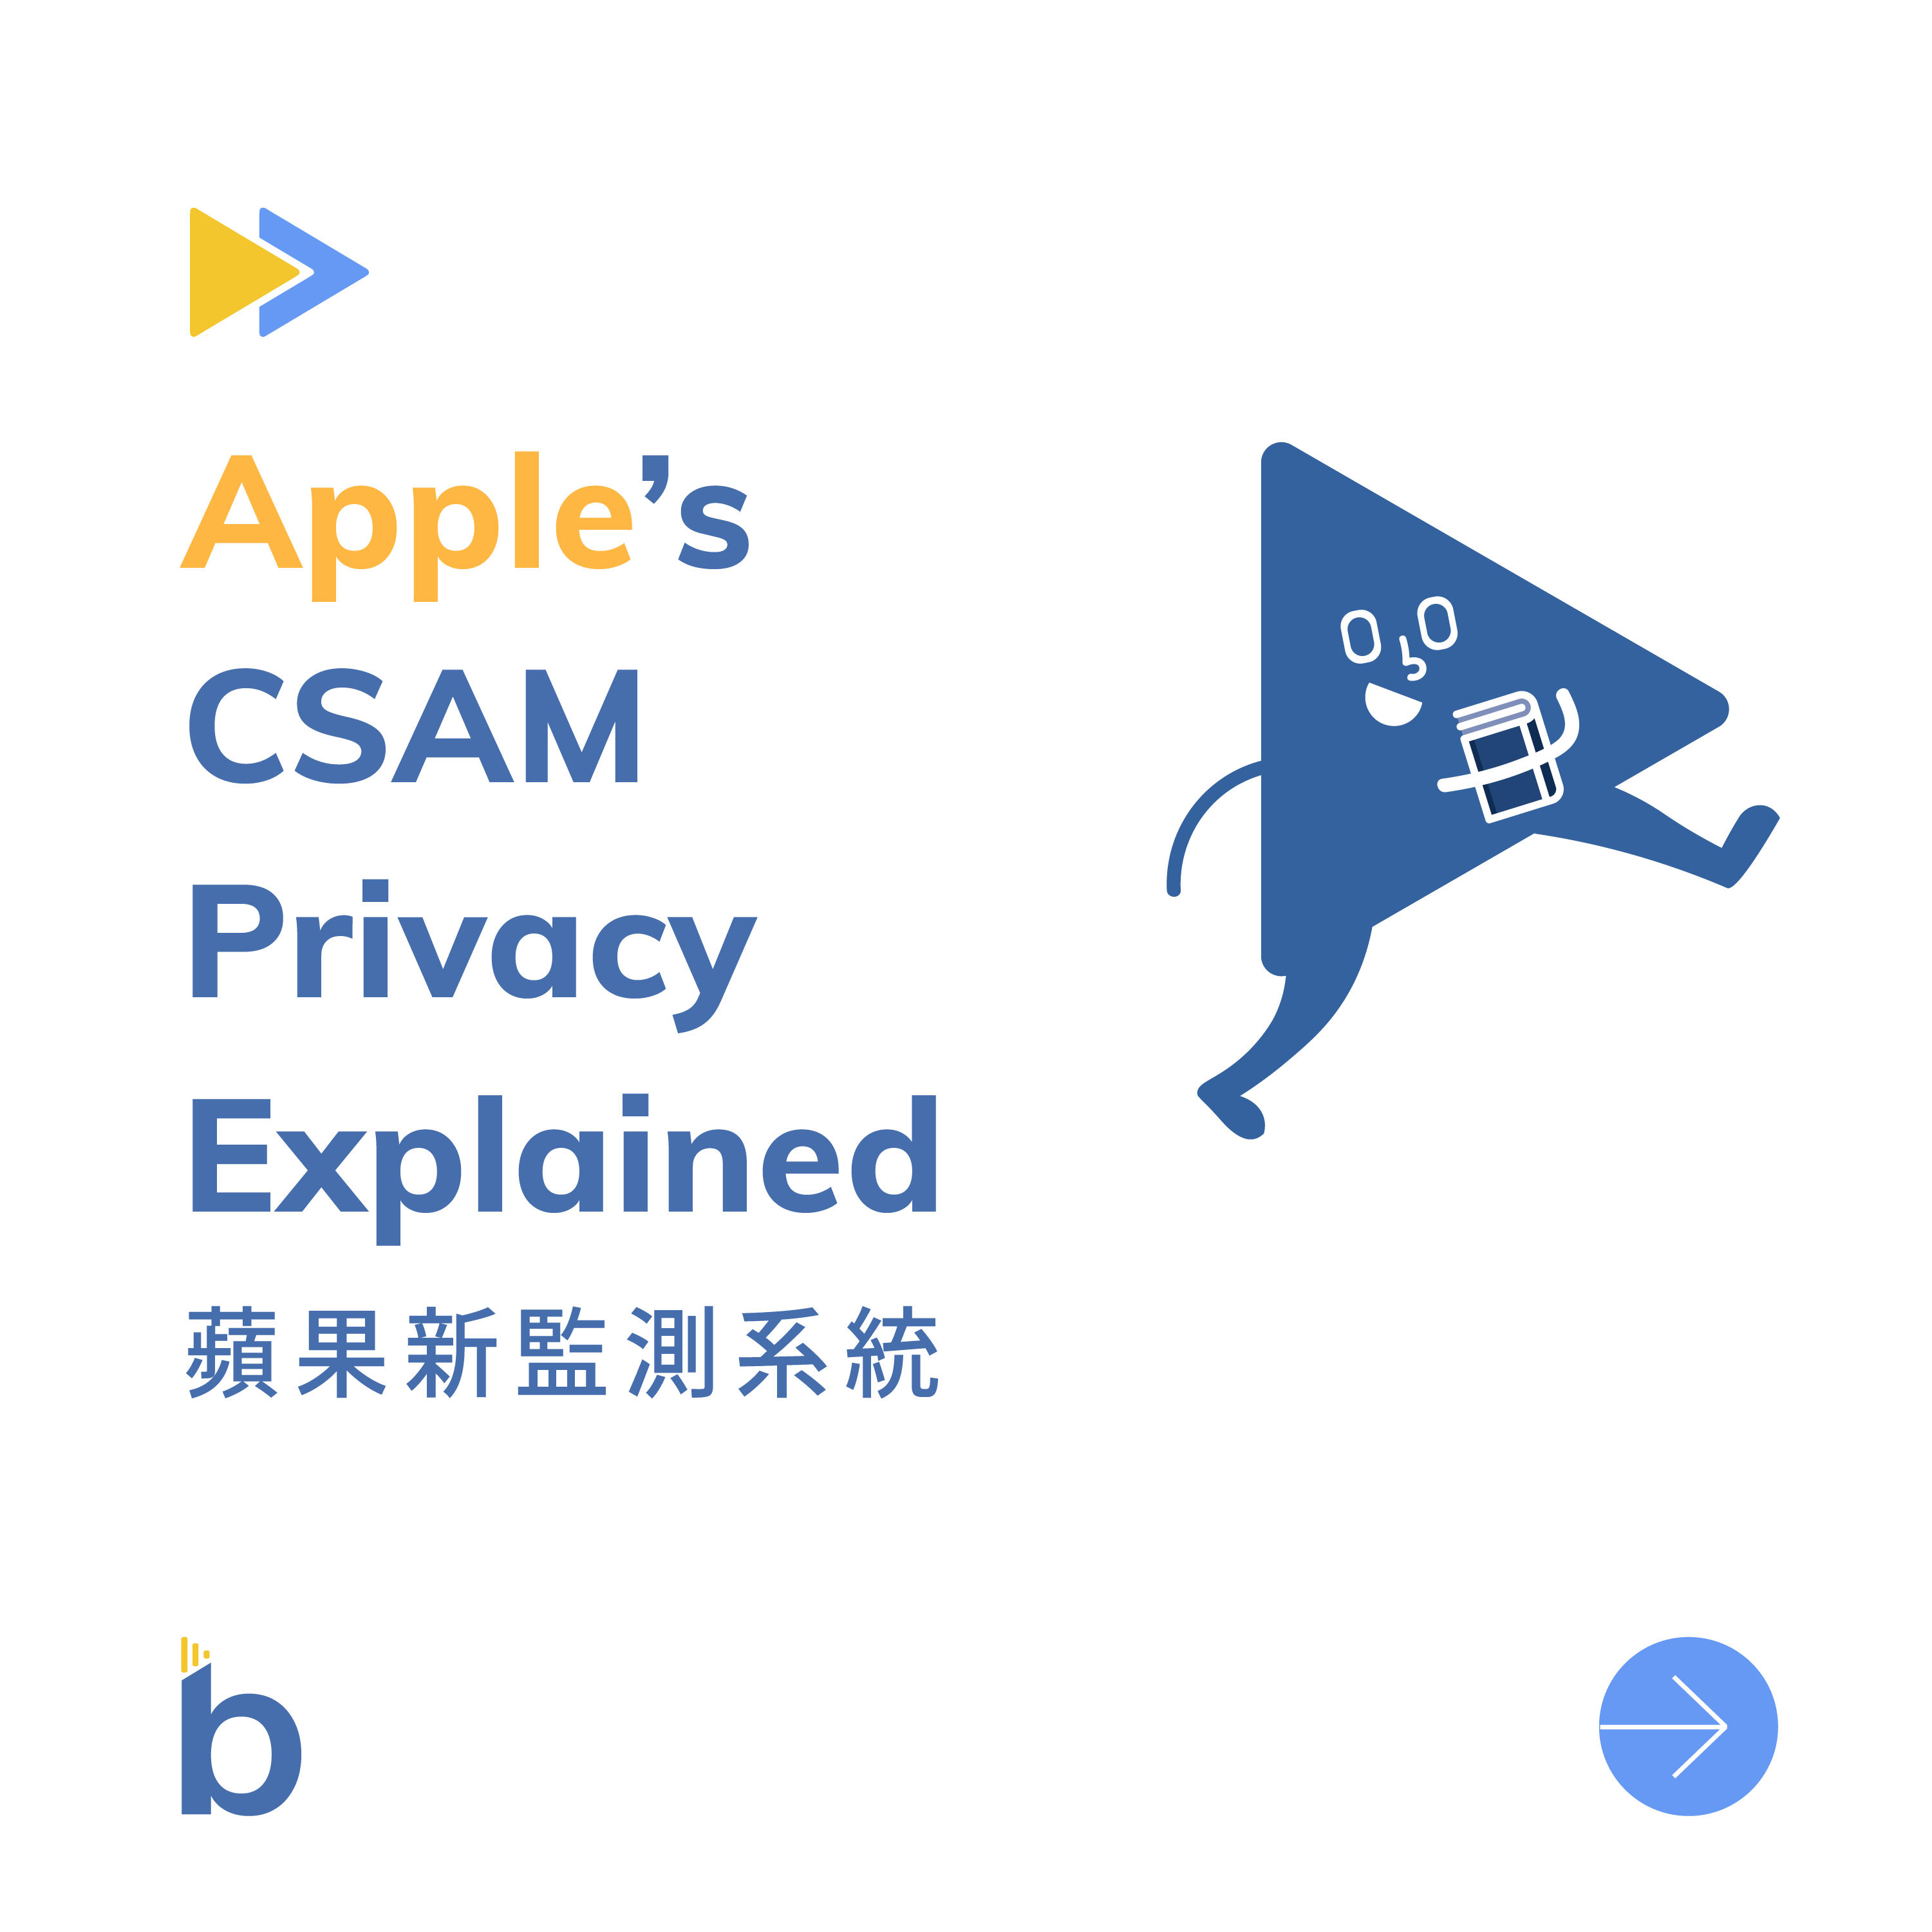 Apple's CSAM Privacy Explained